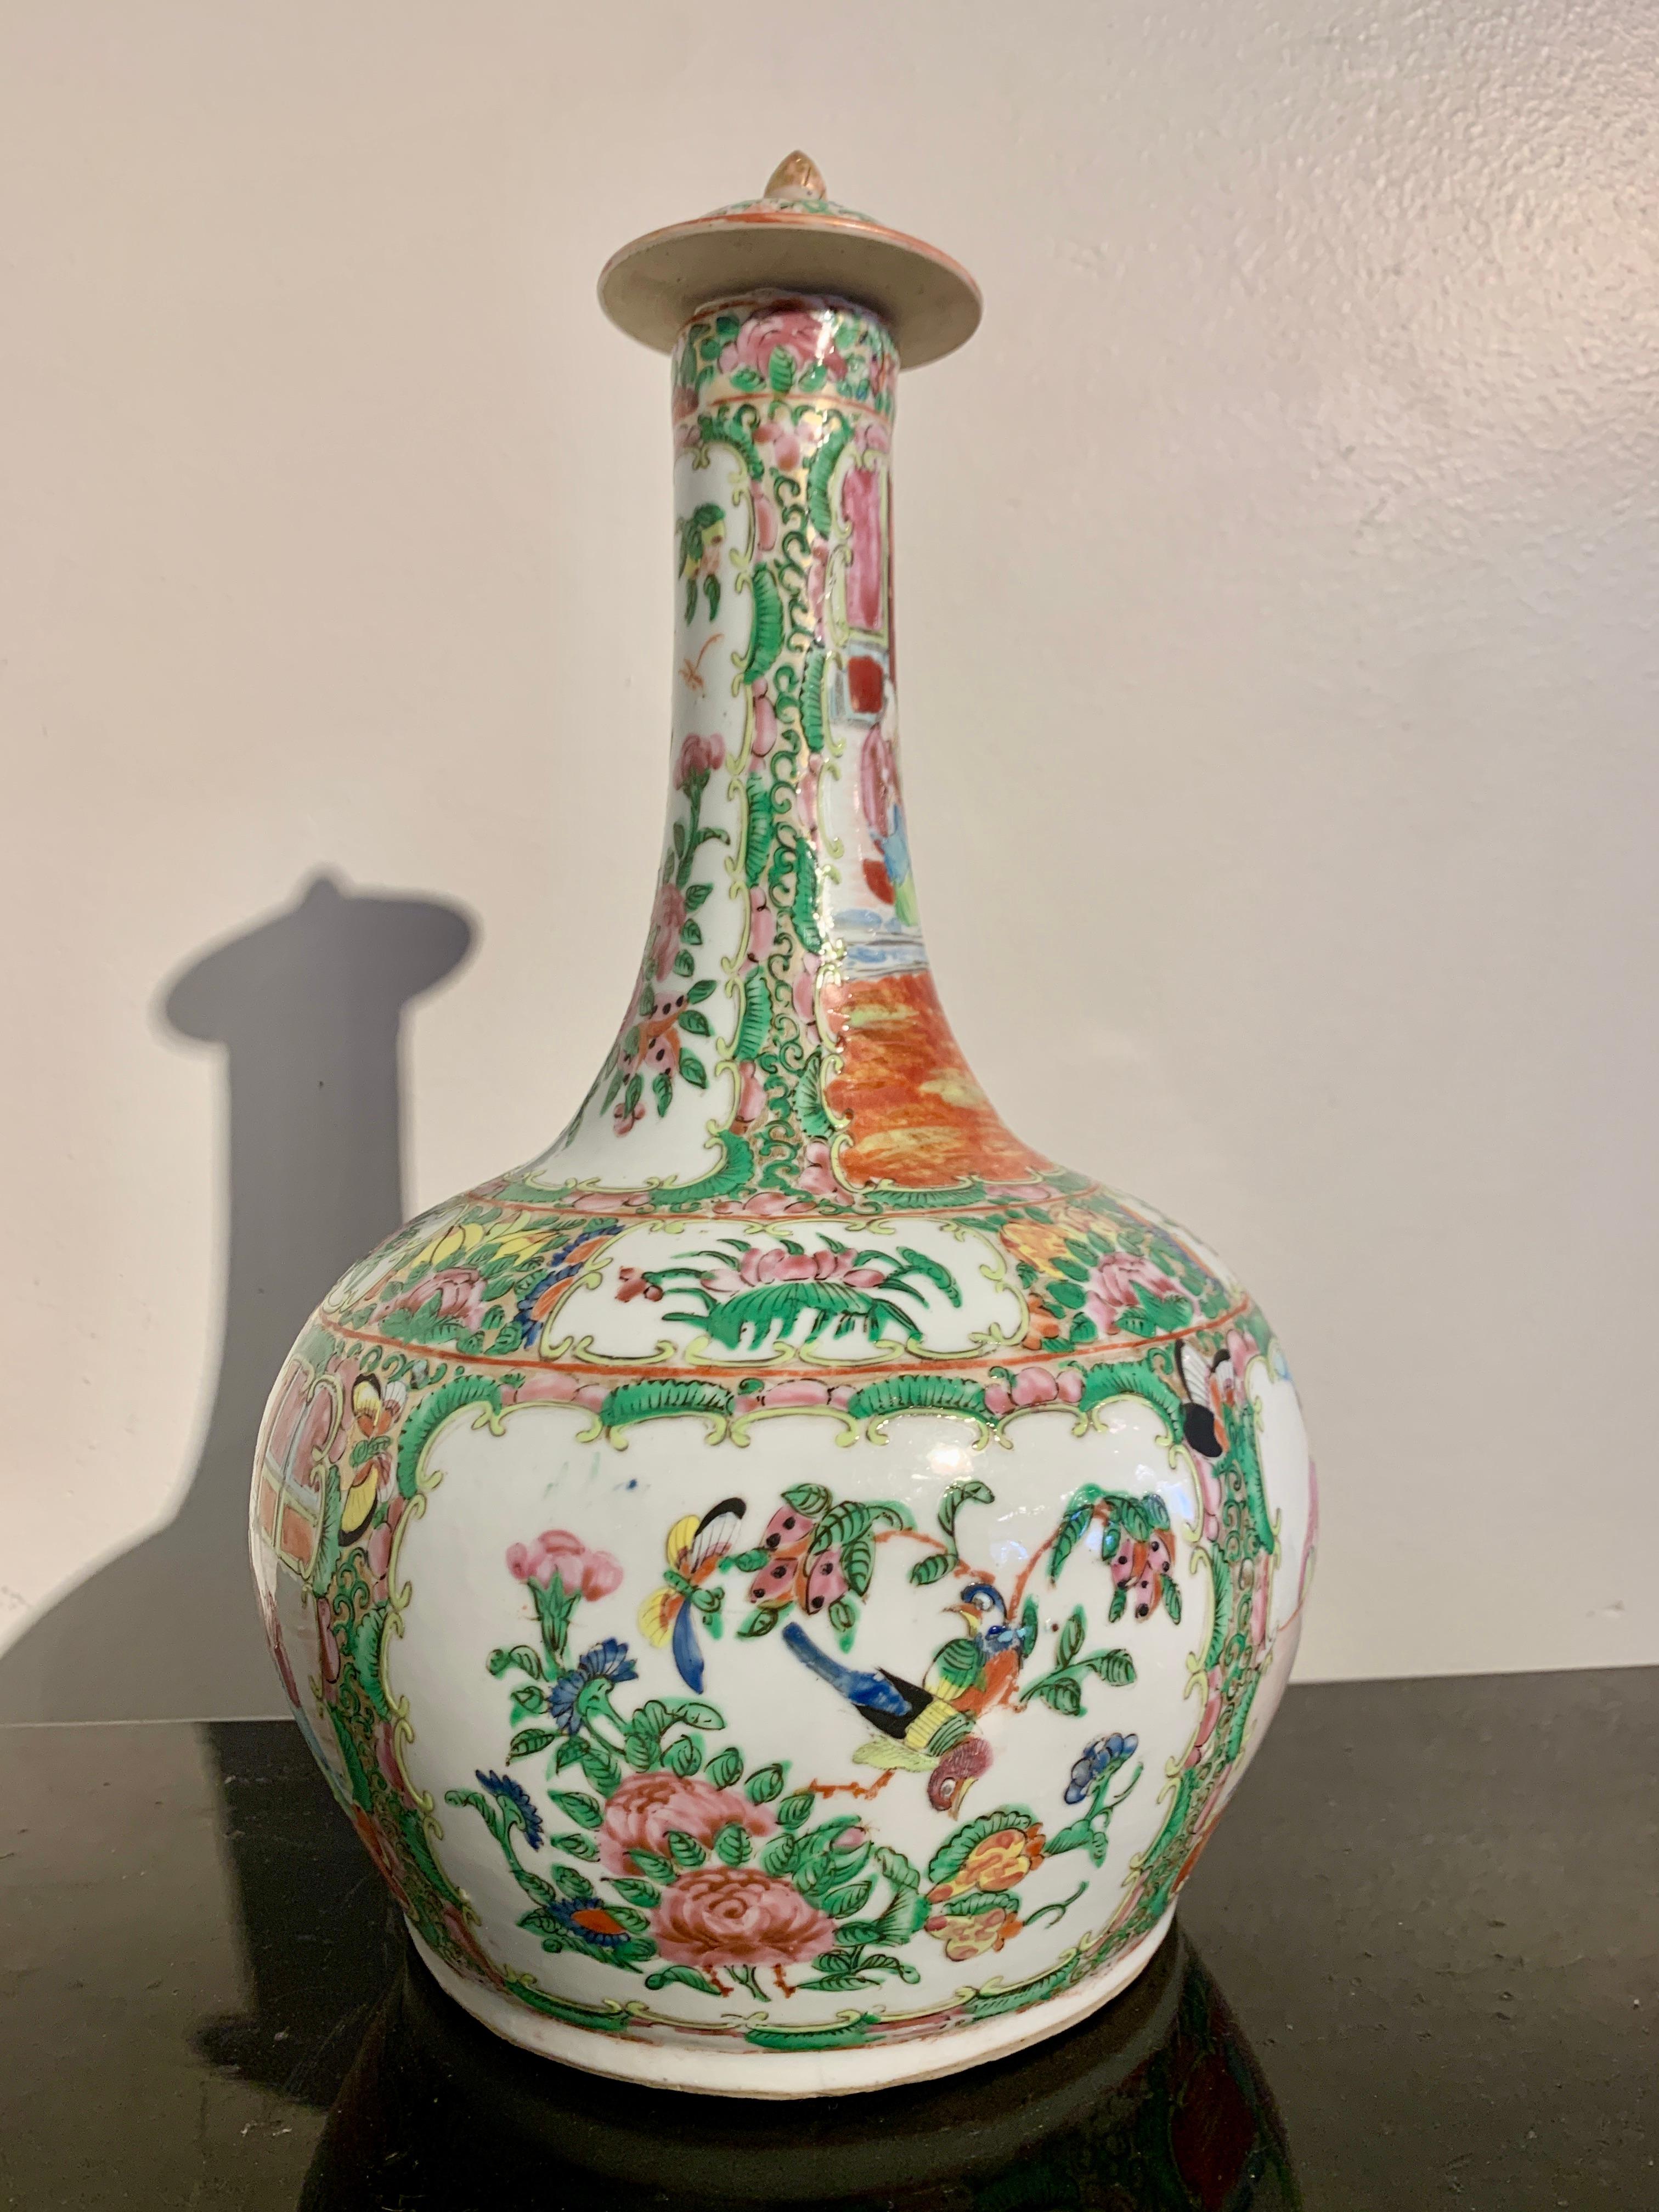 A lovely Chinese Export Rose Medallion large porcelain bottle vase and cover, mid to late 19th century, China. 

The porcelain vase of typical bottle form, with a rounded globular body and tall, narrow neck, and surmounted by a squat lid. The vase